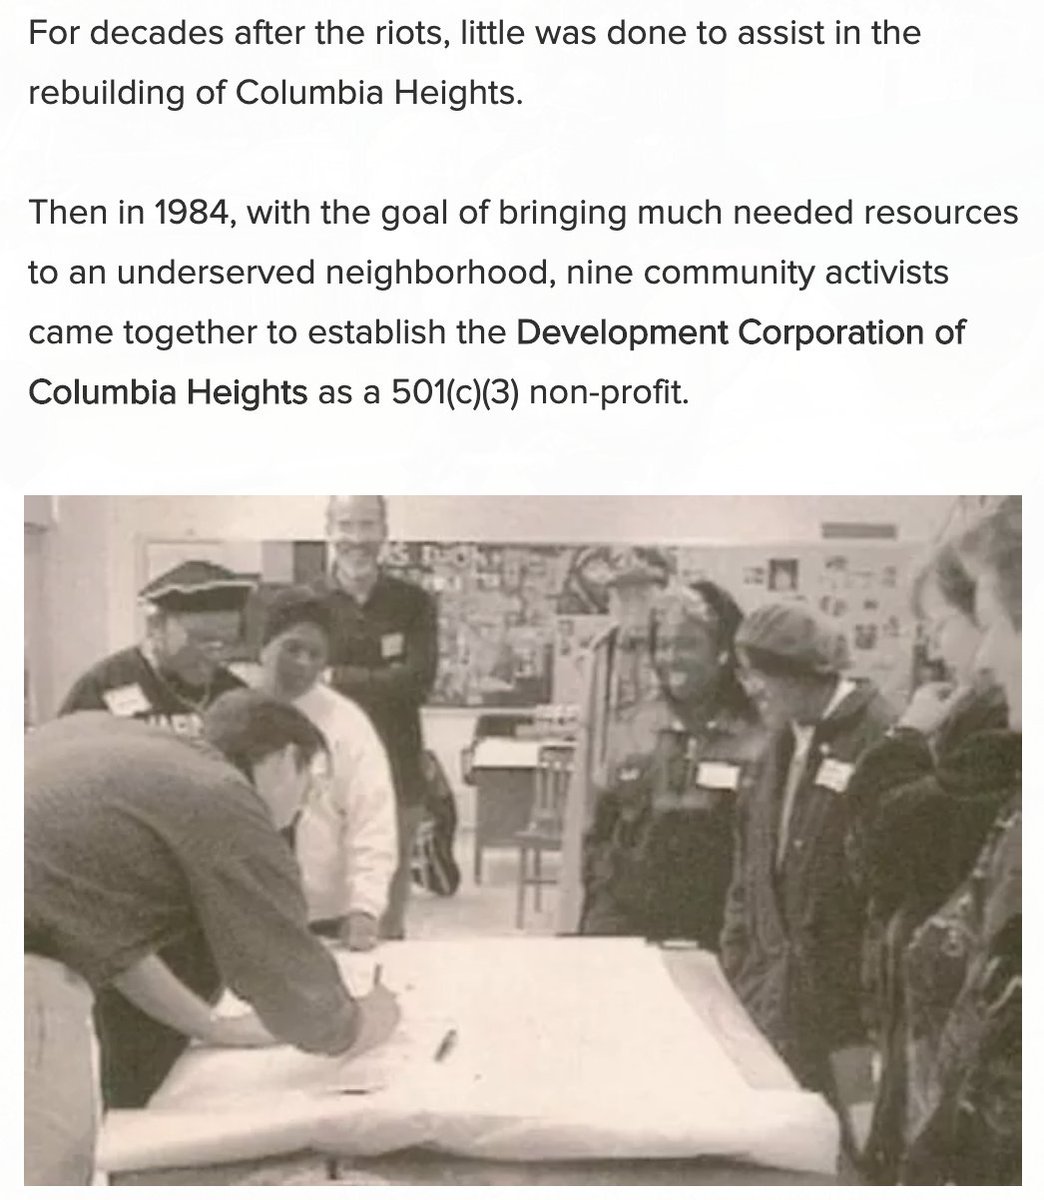 The '68 uprising left a lot of Columbia Heights in ruins. Racism & disinvestment caused that uprising and continued disinvestment let the area stay that way. In the decades after, local residents - many of which were associated w/ SNCC - came up with plans for revitalization.